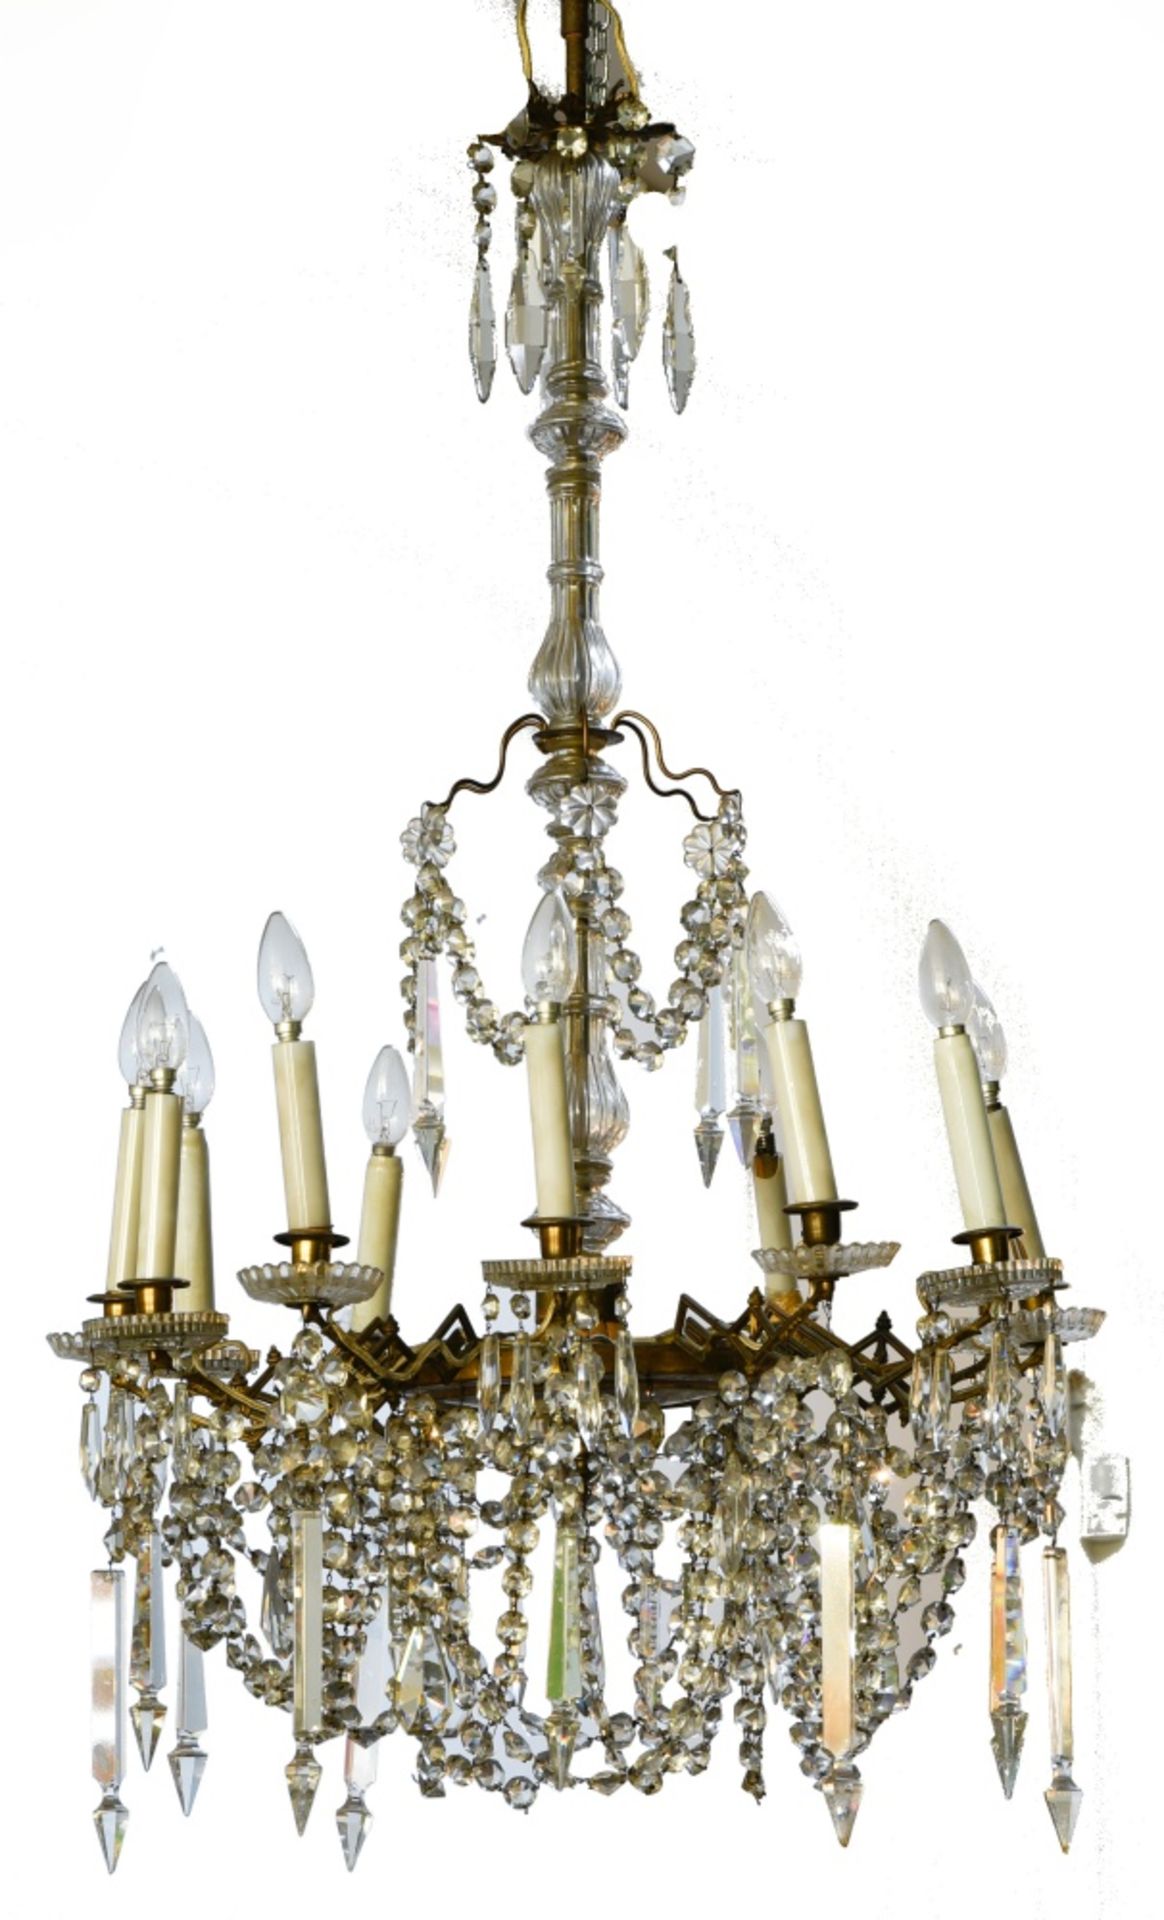 Napoleon III era work Large 12-branched chandelier, Bronze, brass, and glass, with crystal drops